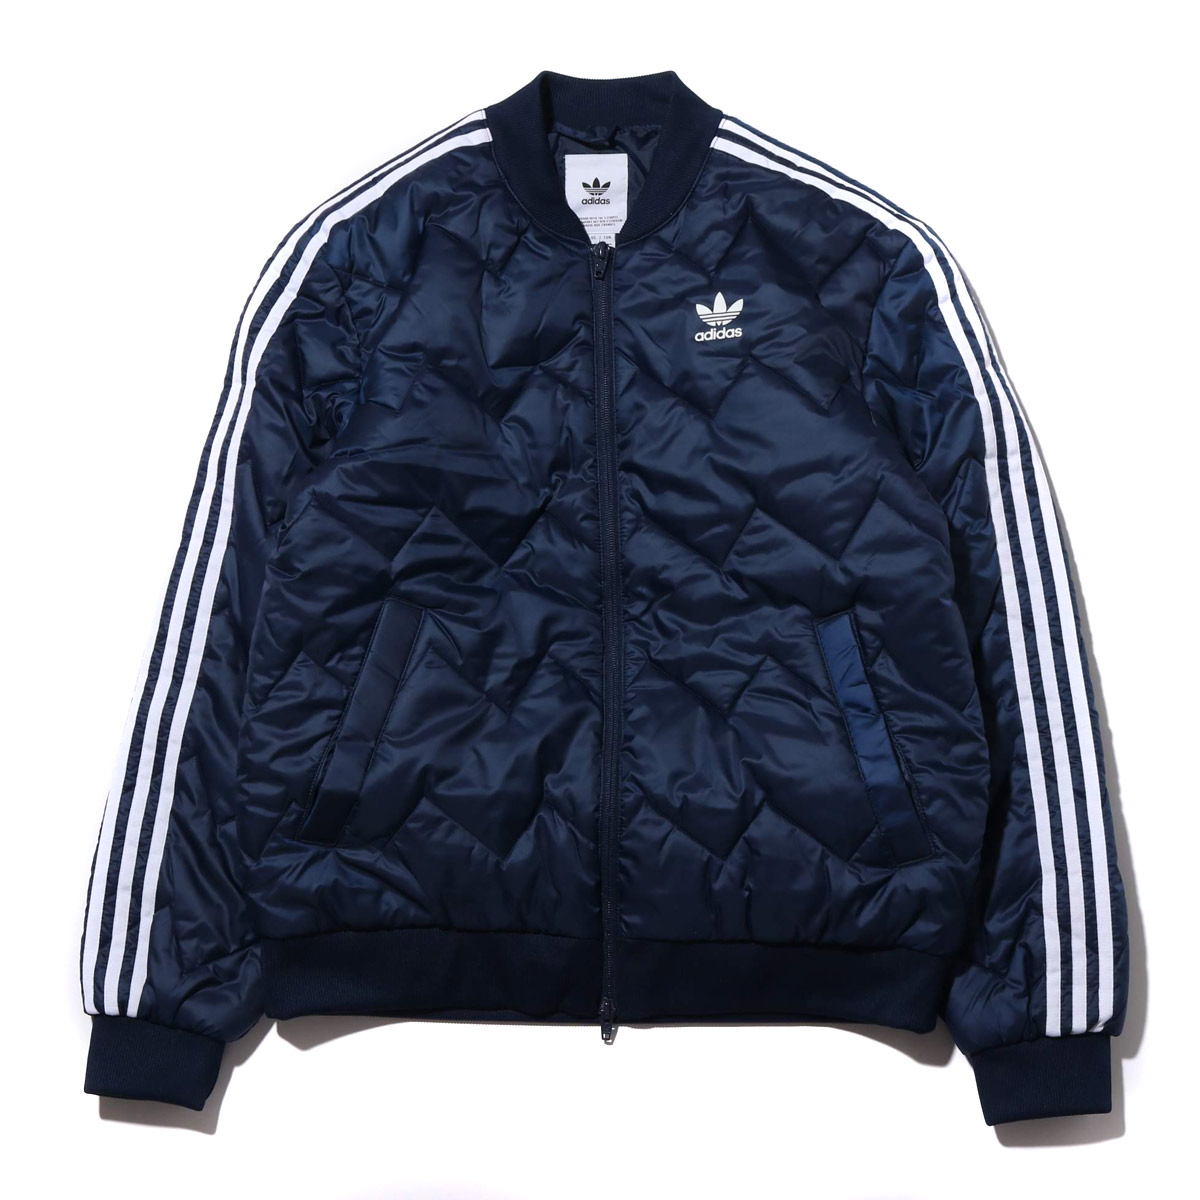 adidas sst quilted